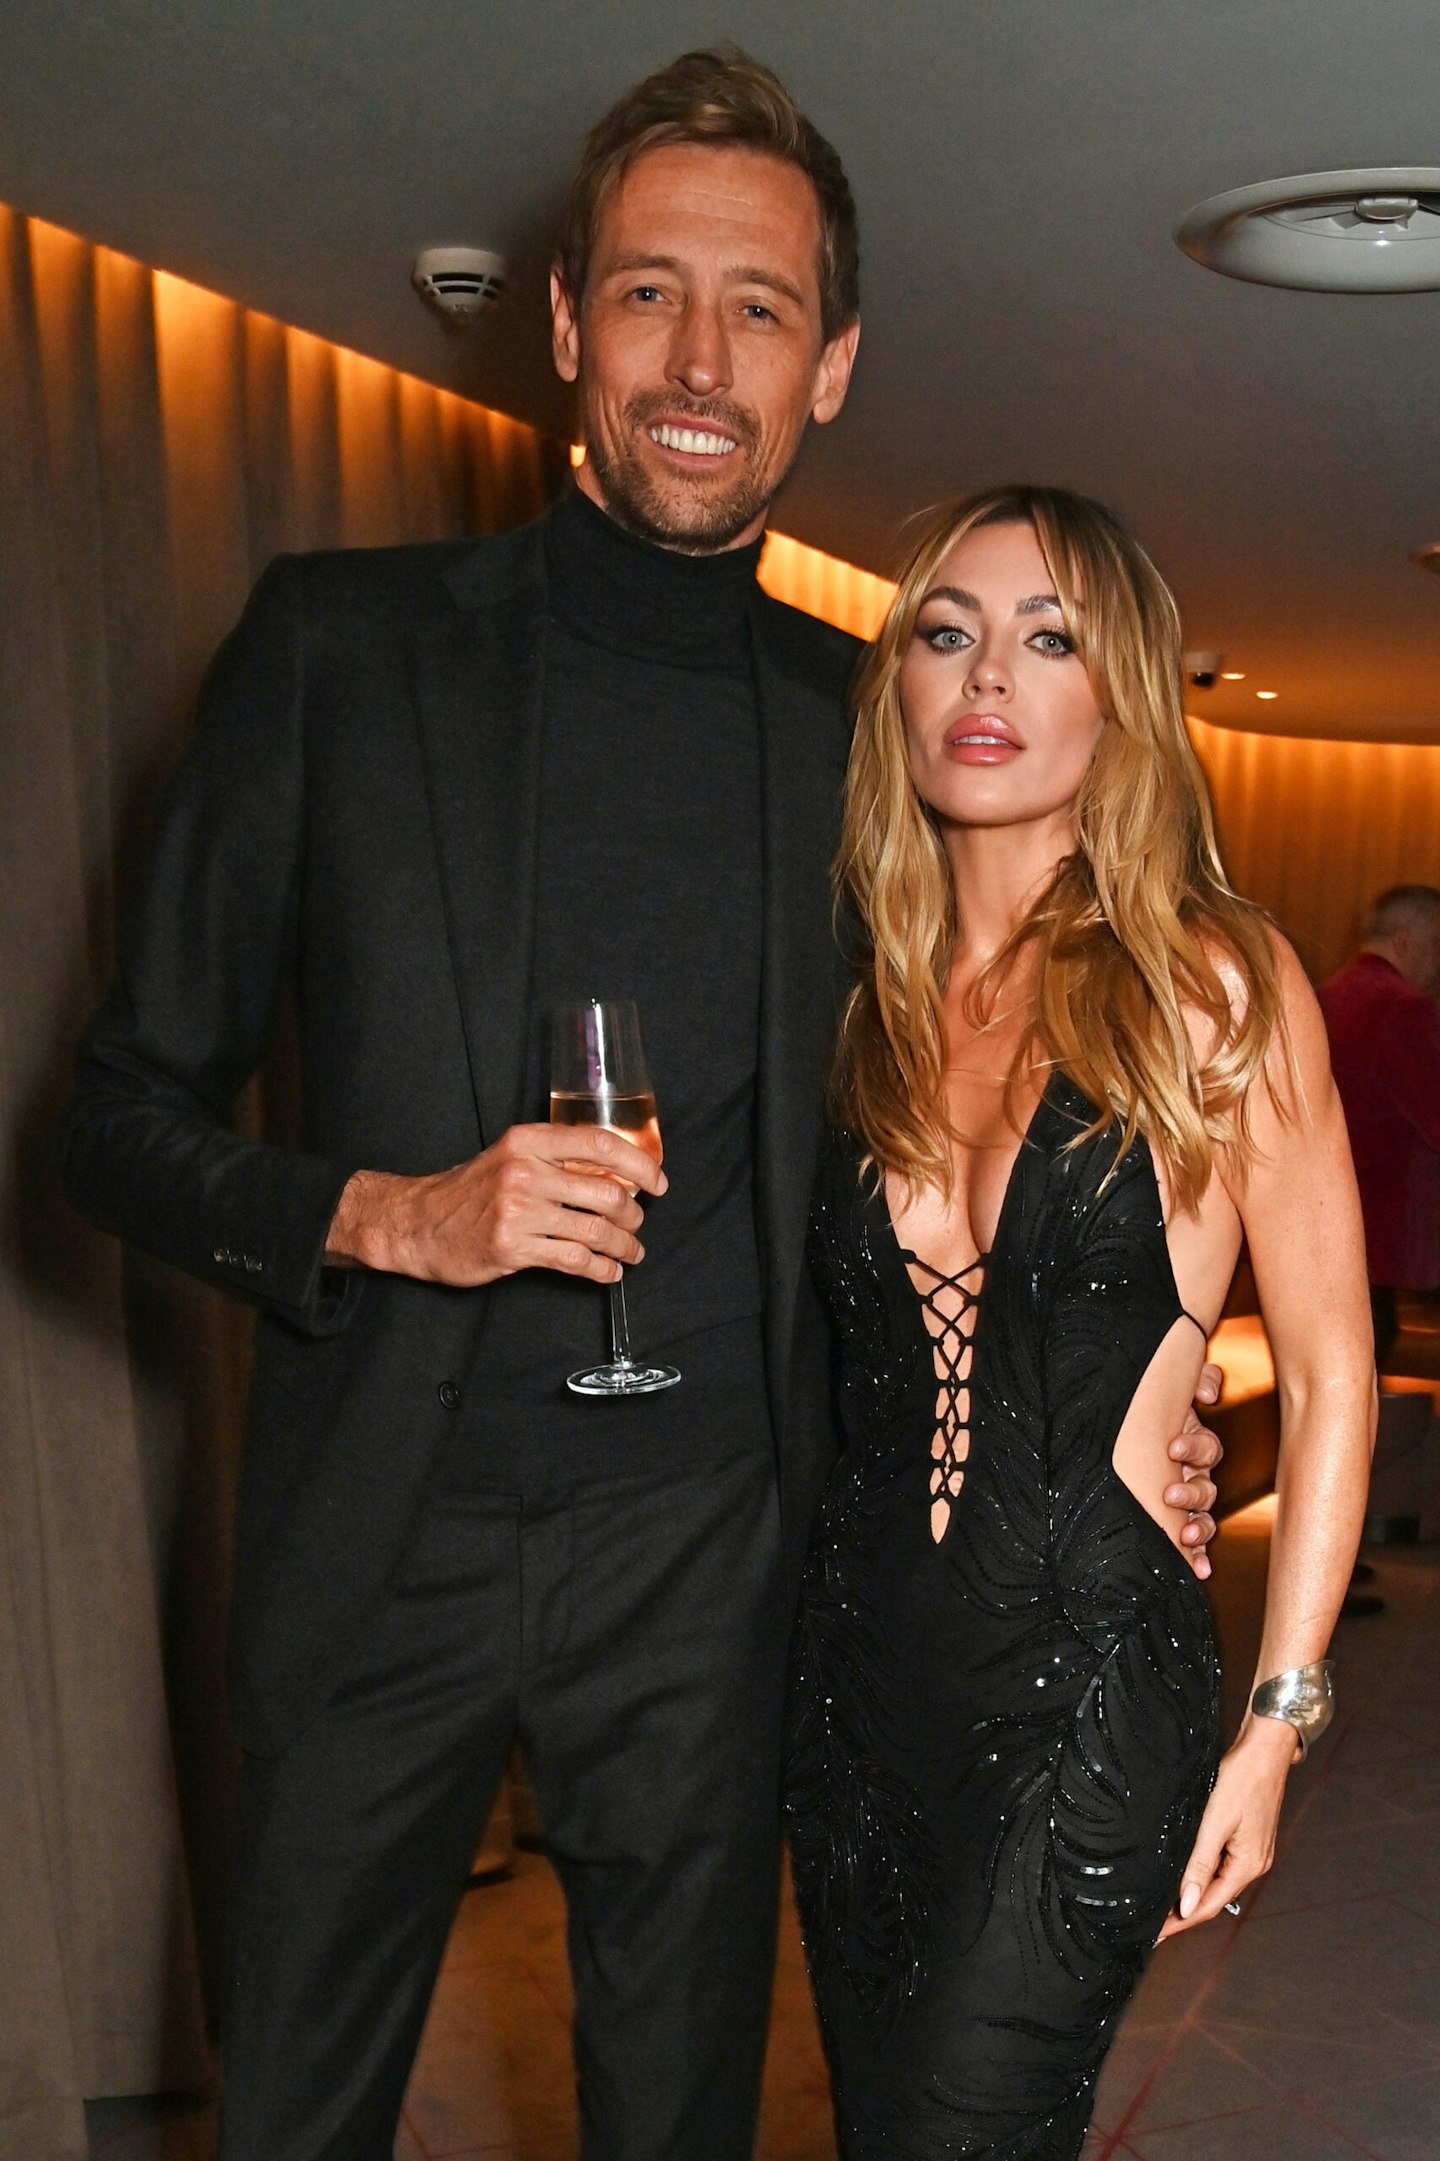 Rio and Kate are good friends with Peter Crouch and Abbey Clancy